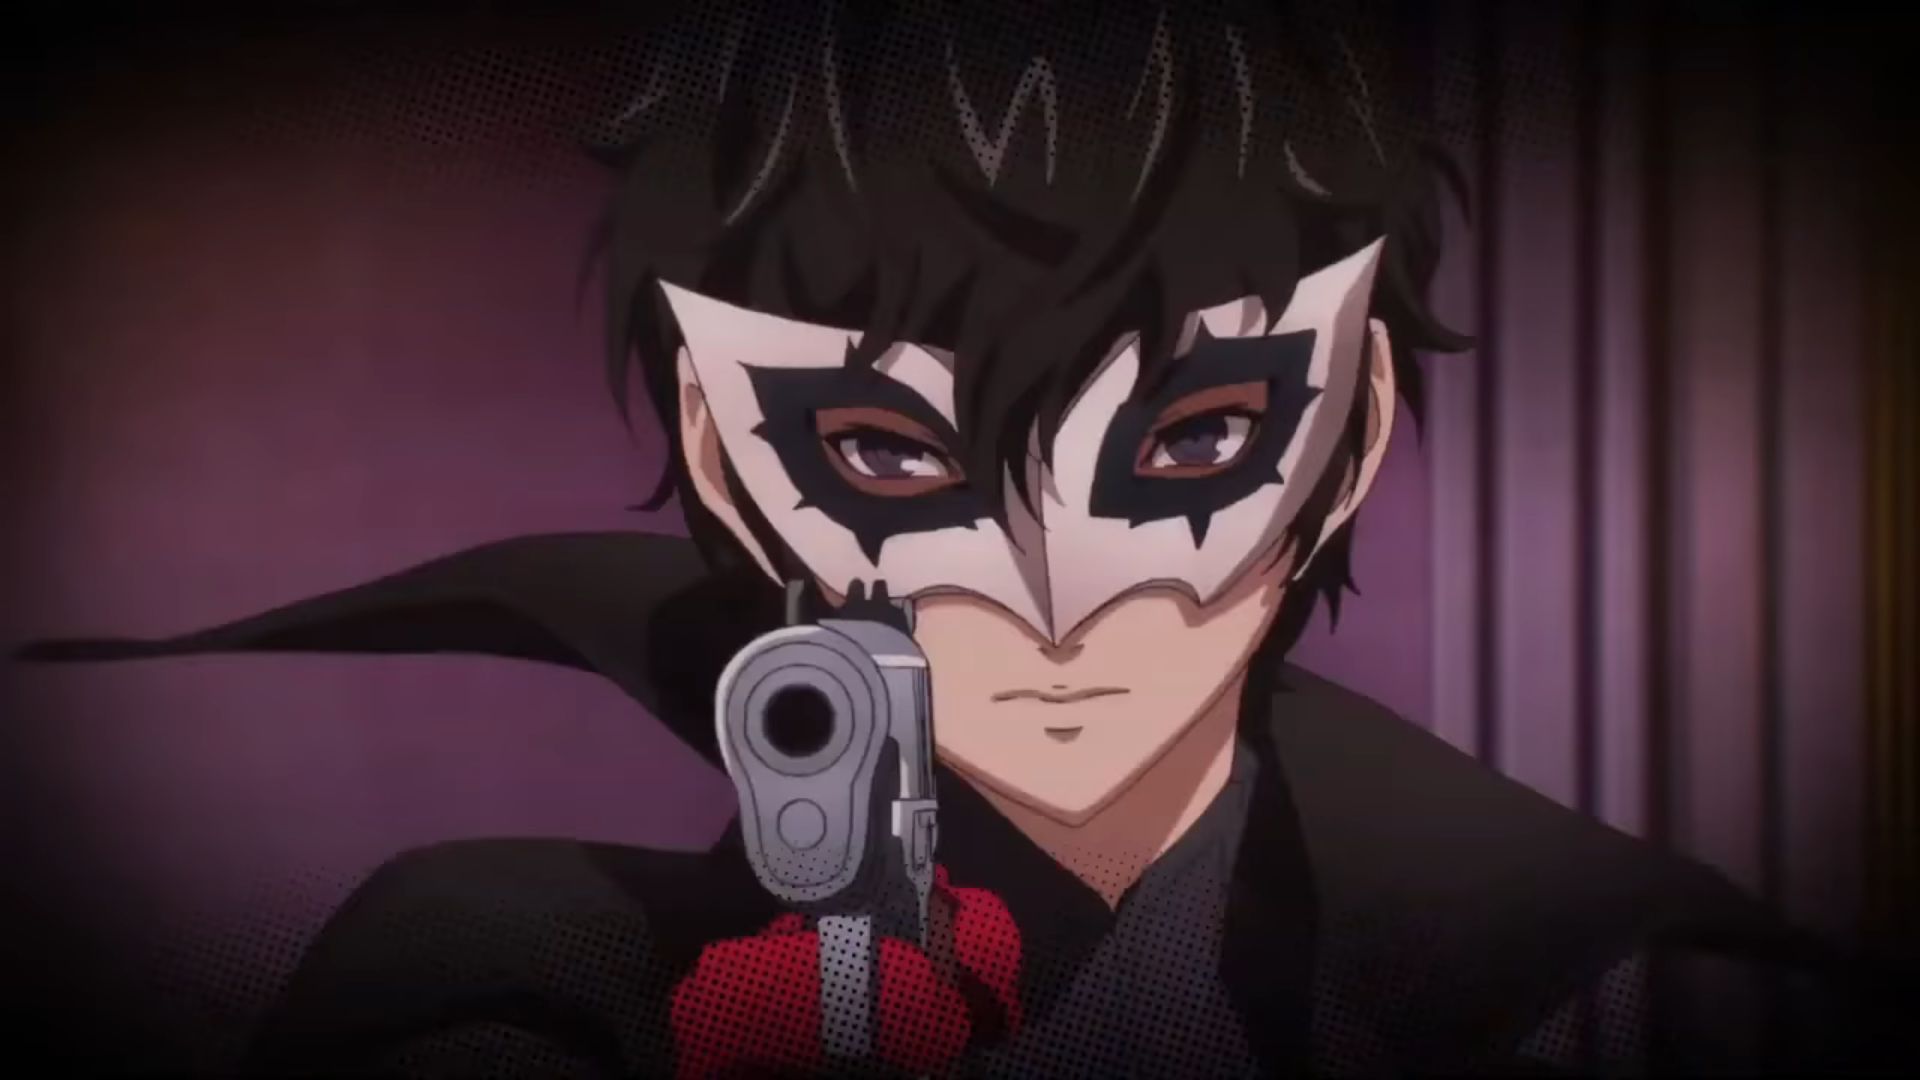 Persona 5 Anime Getting New Special Stars and Ours Likely